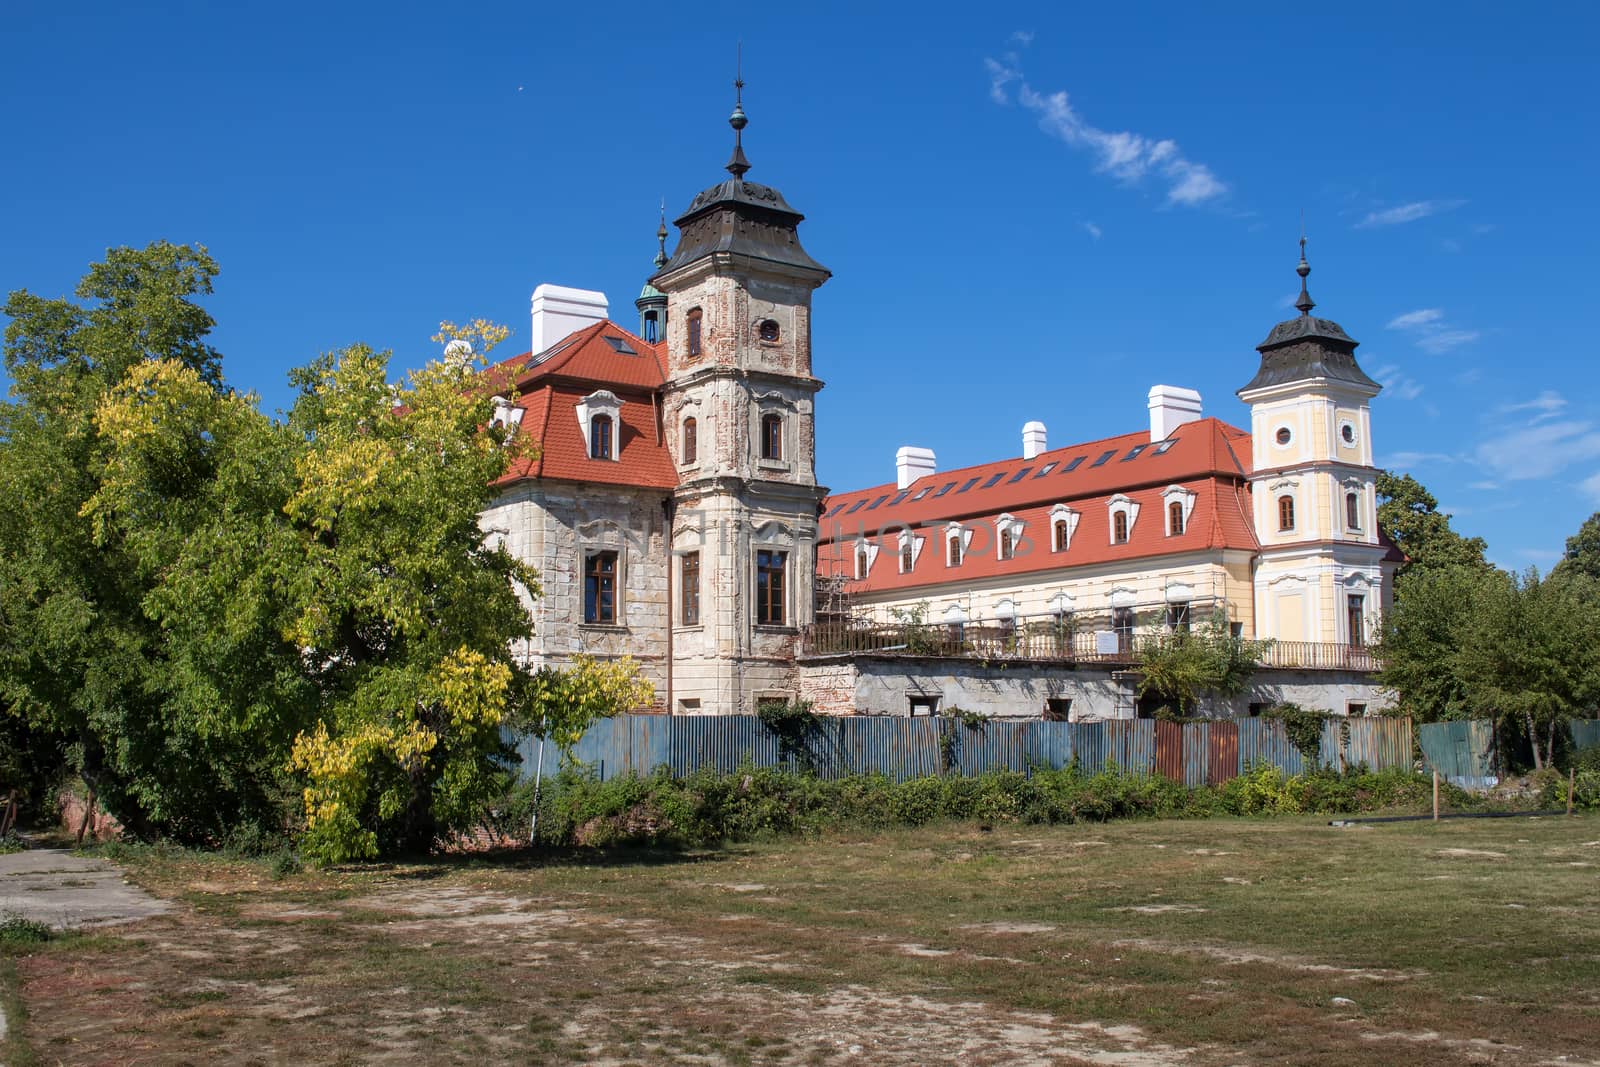 Partly rebuild manor-house, located in a city Bernolakovo. Old towers and new roof. Blue sky with some clouds.